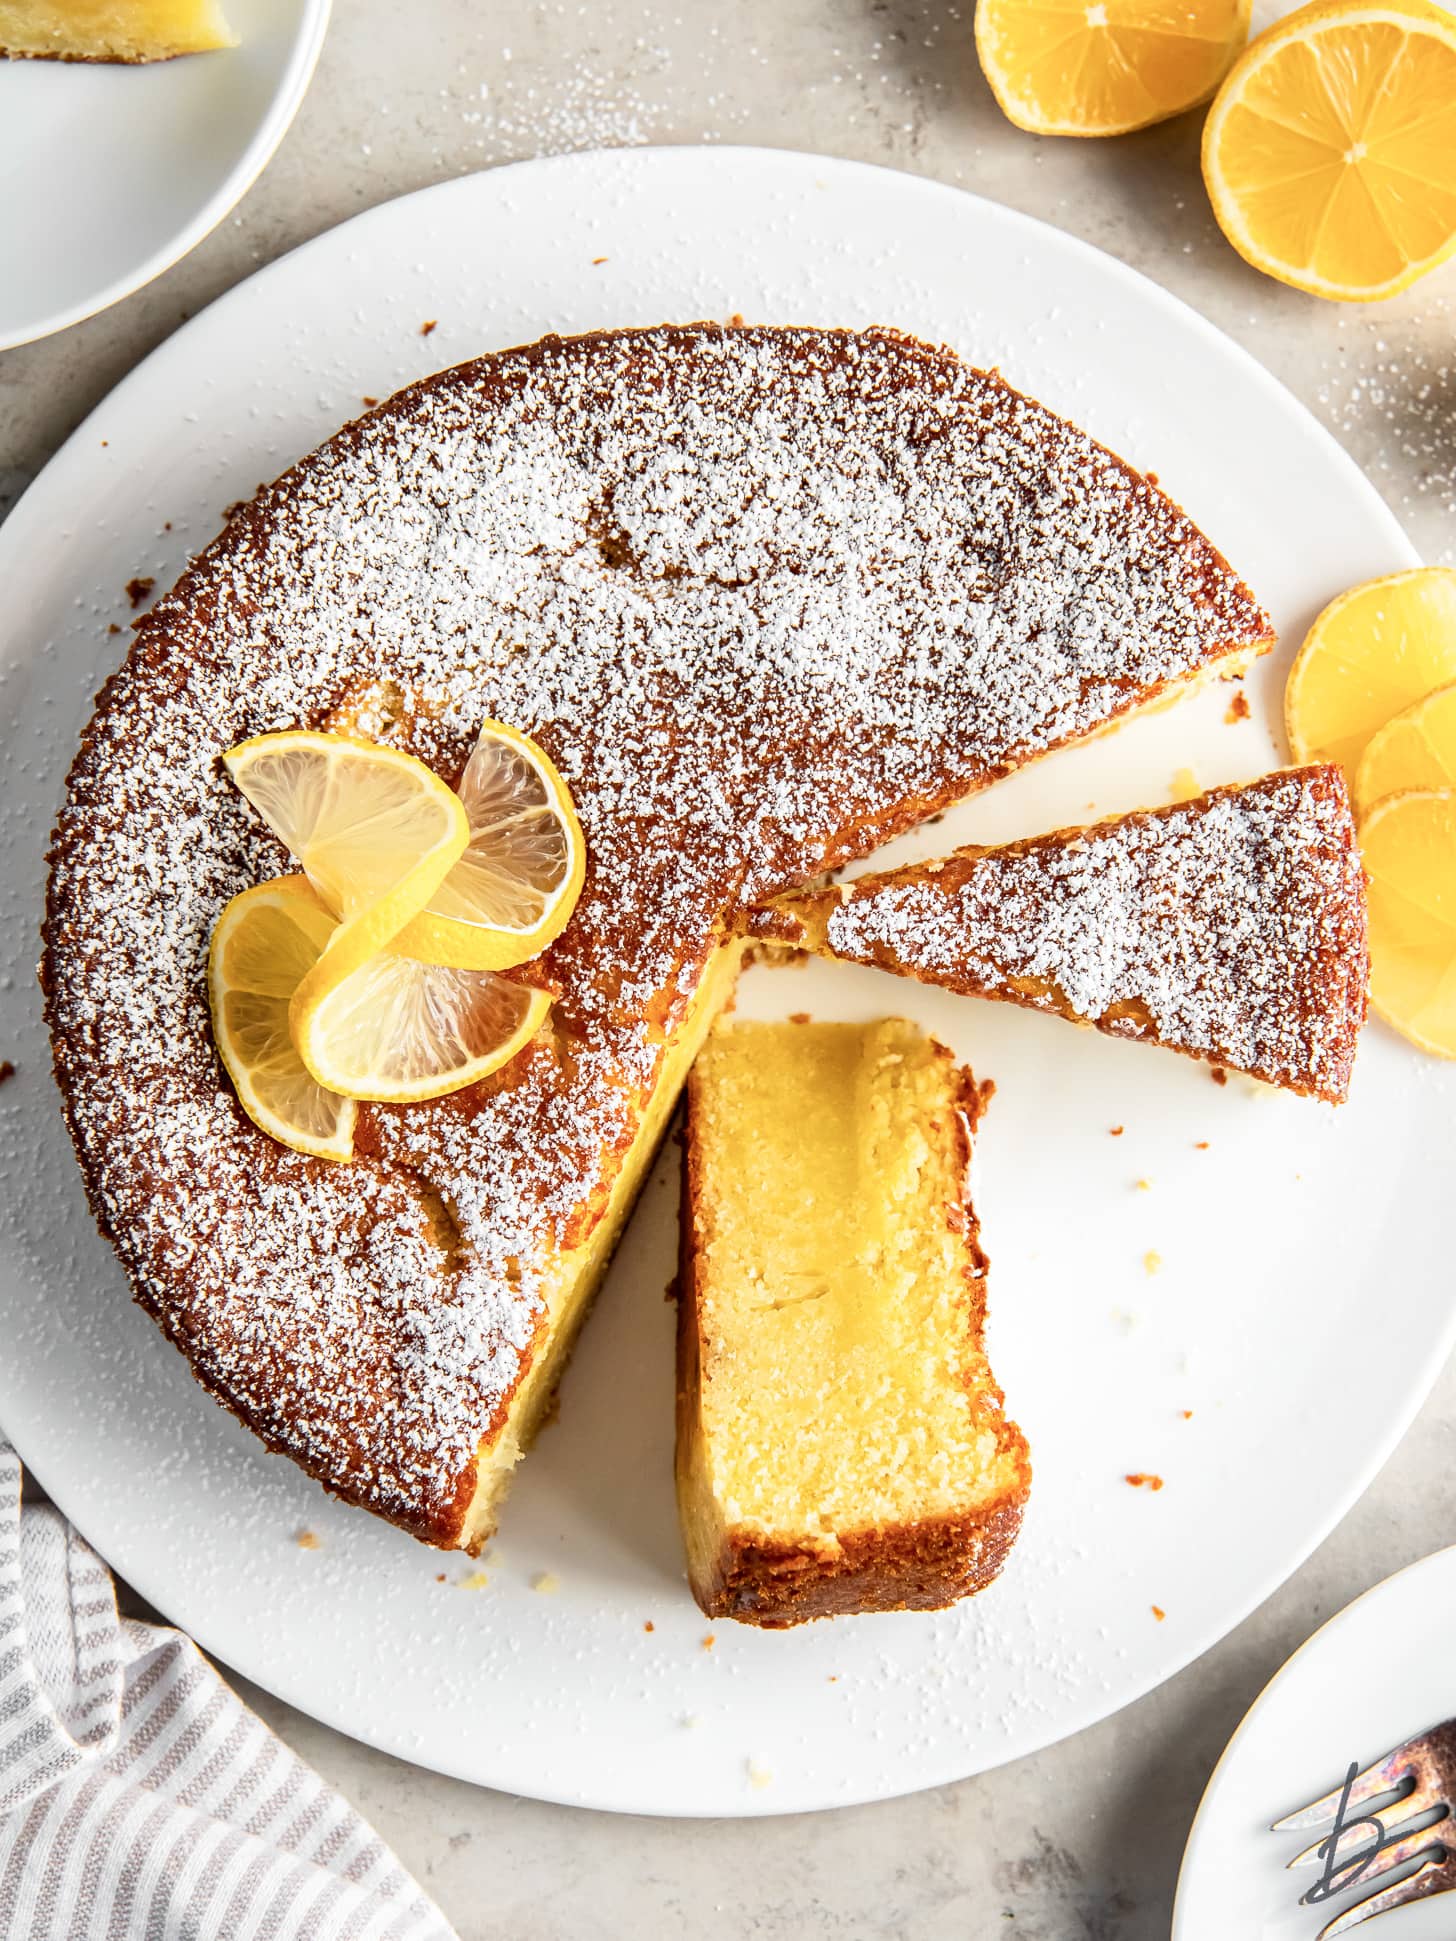 lemon olive oil cake with a few slices cut out and one on its side.